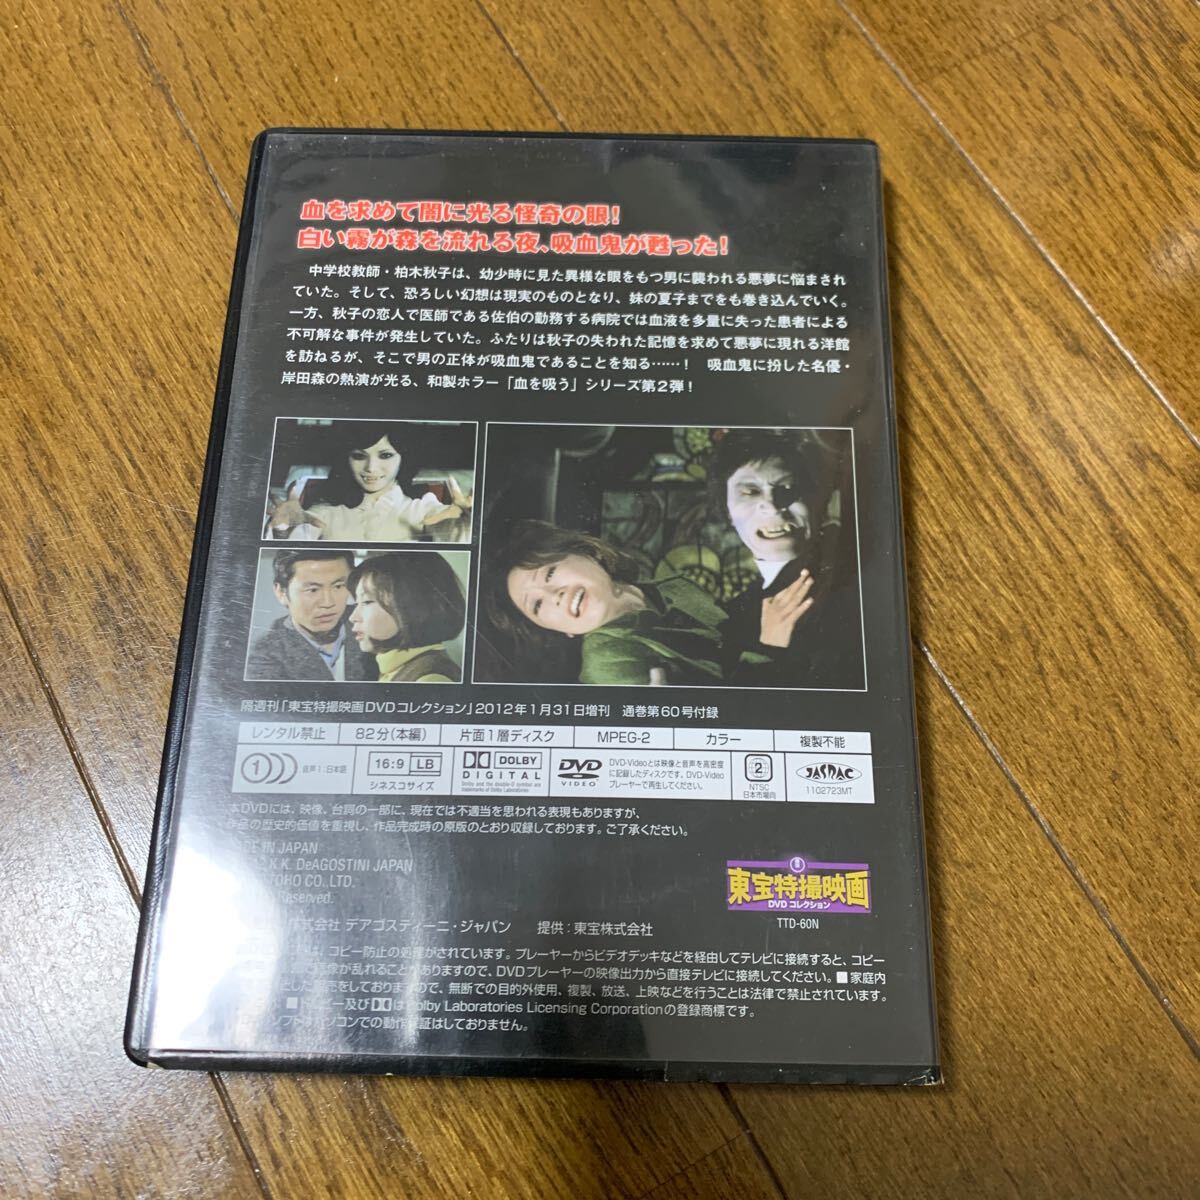  special effects DVD higashi . special effects movie DVD collection ... pavilion .... eye 